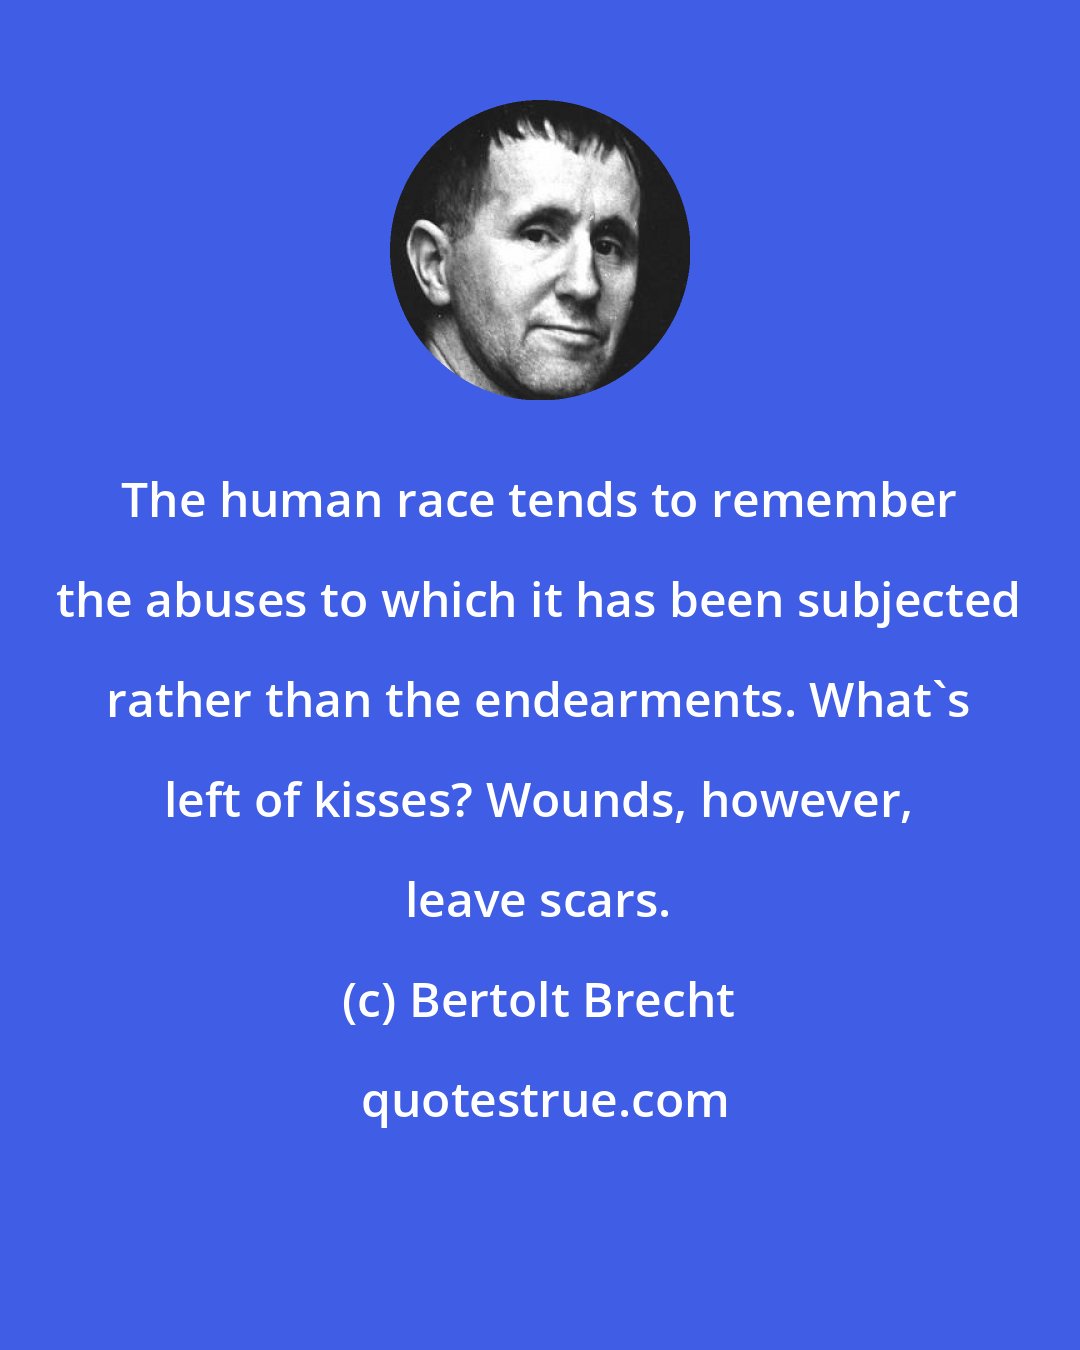 Bertolt Brecht: The human race tends to remember the abuses to which it has been subjected rather than the endearments. What's left of kisses? Wounds, however, leave scars.